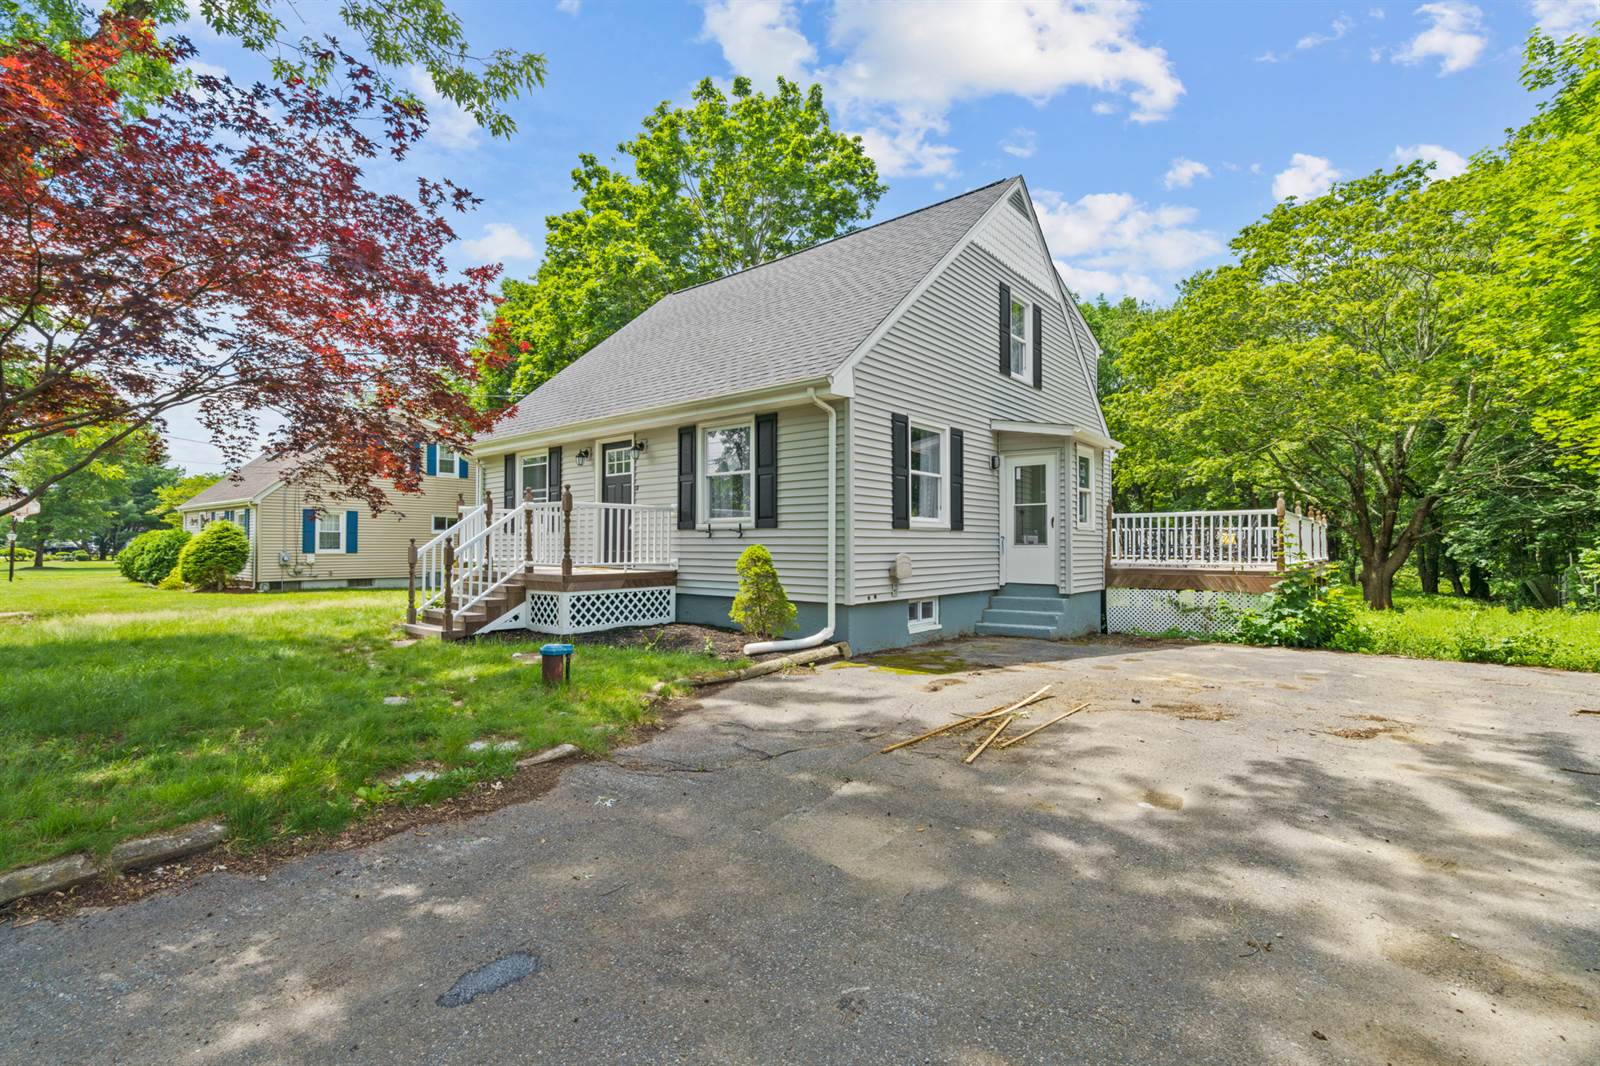 22 Agricultural Ave, Rehoboth, MA 02769